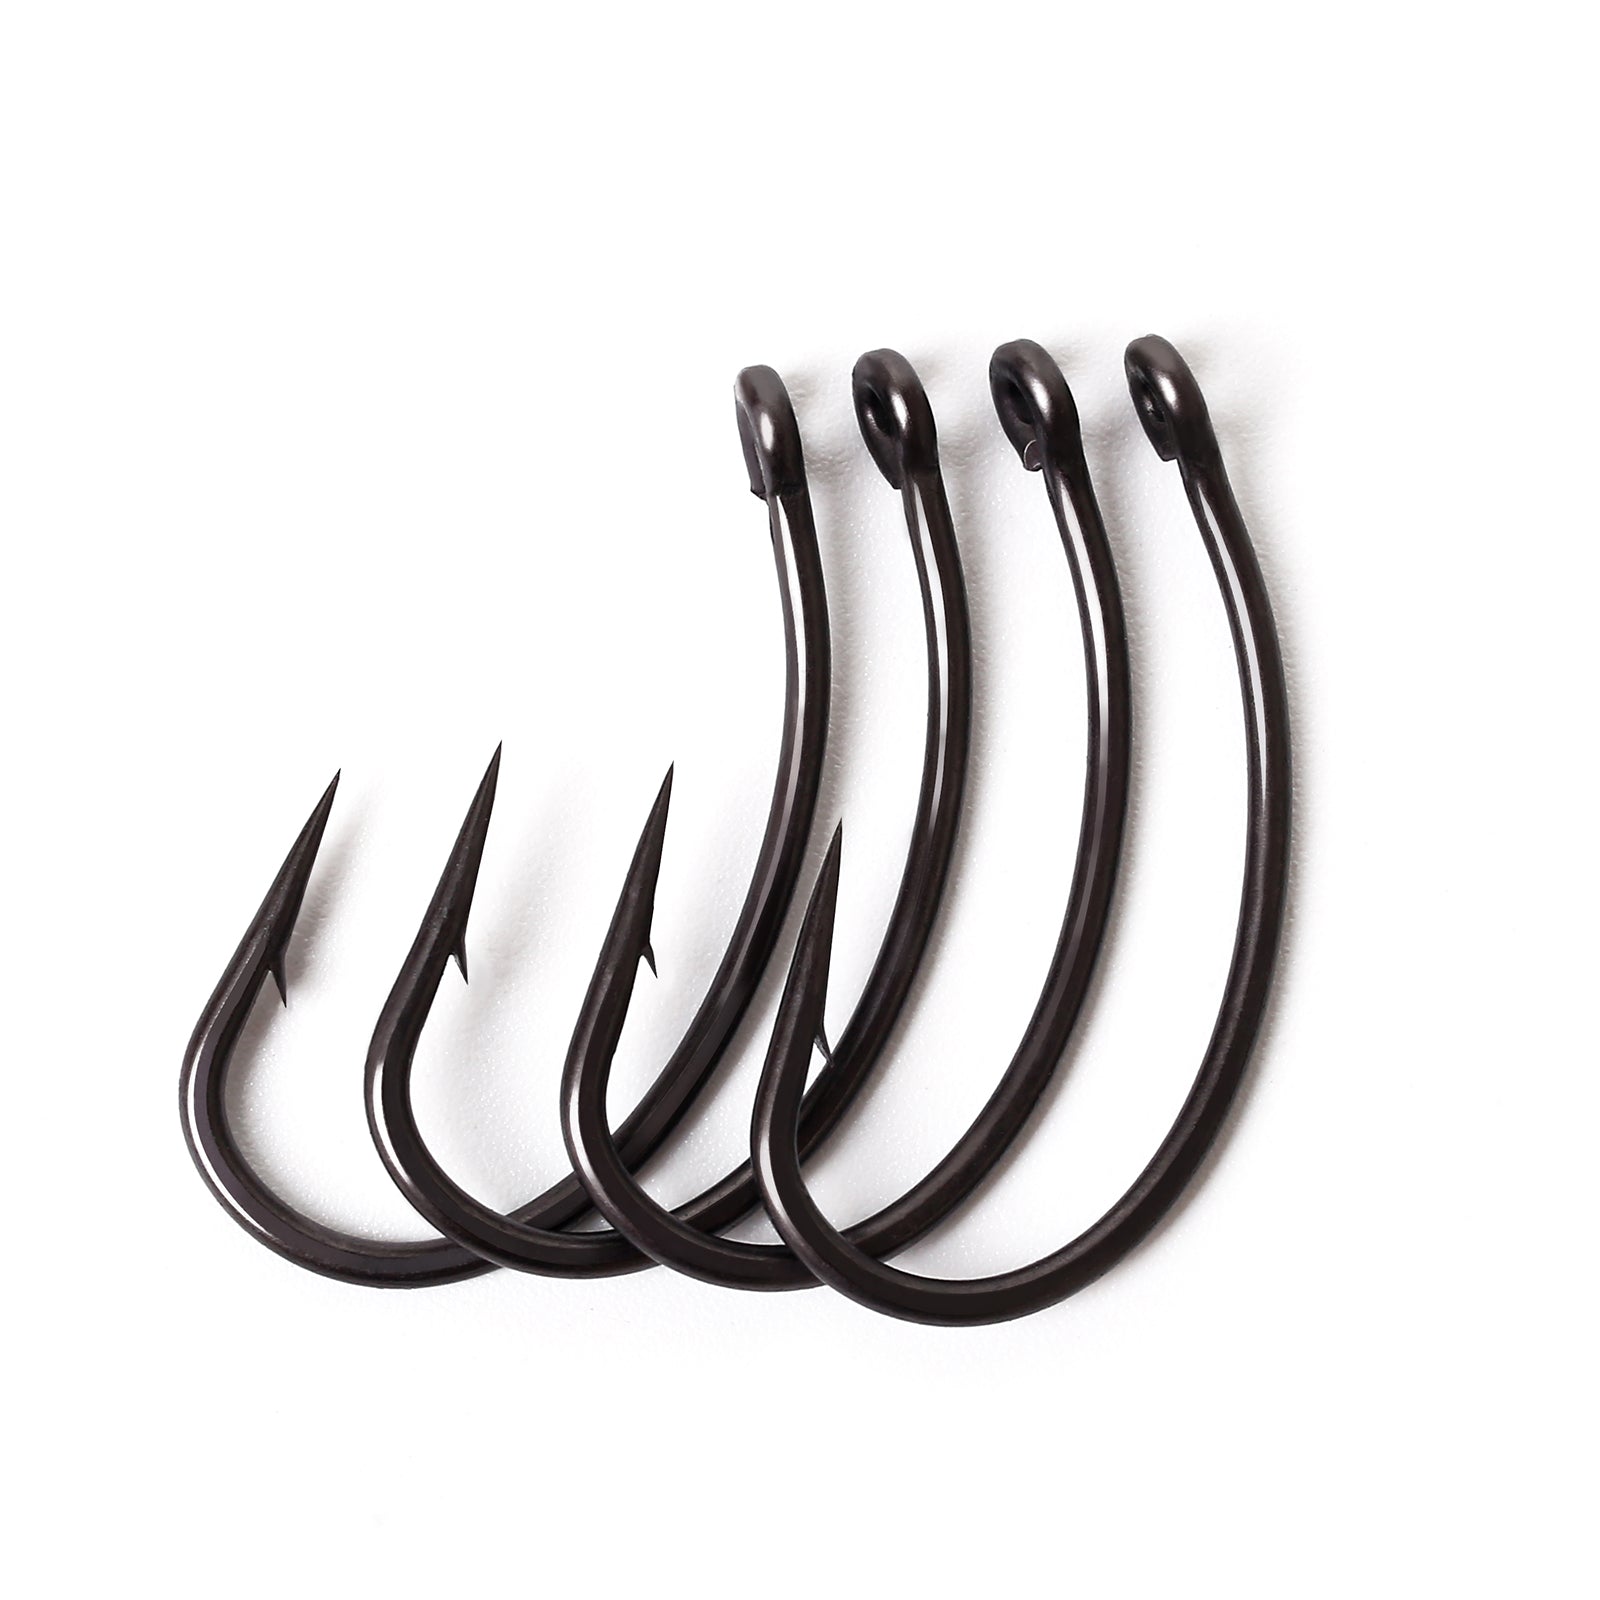 Barbed hooks versus barbless hooks – which one is better for carp fishing –  The Masterblanker